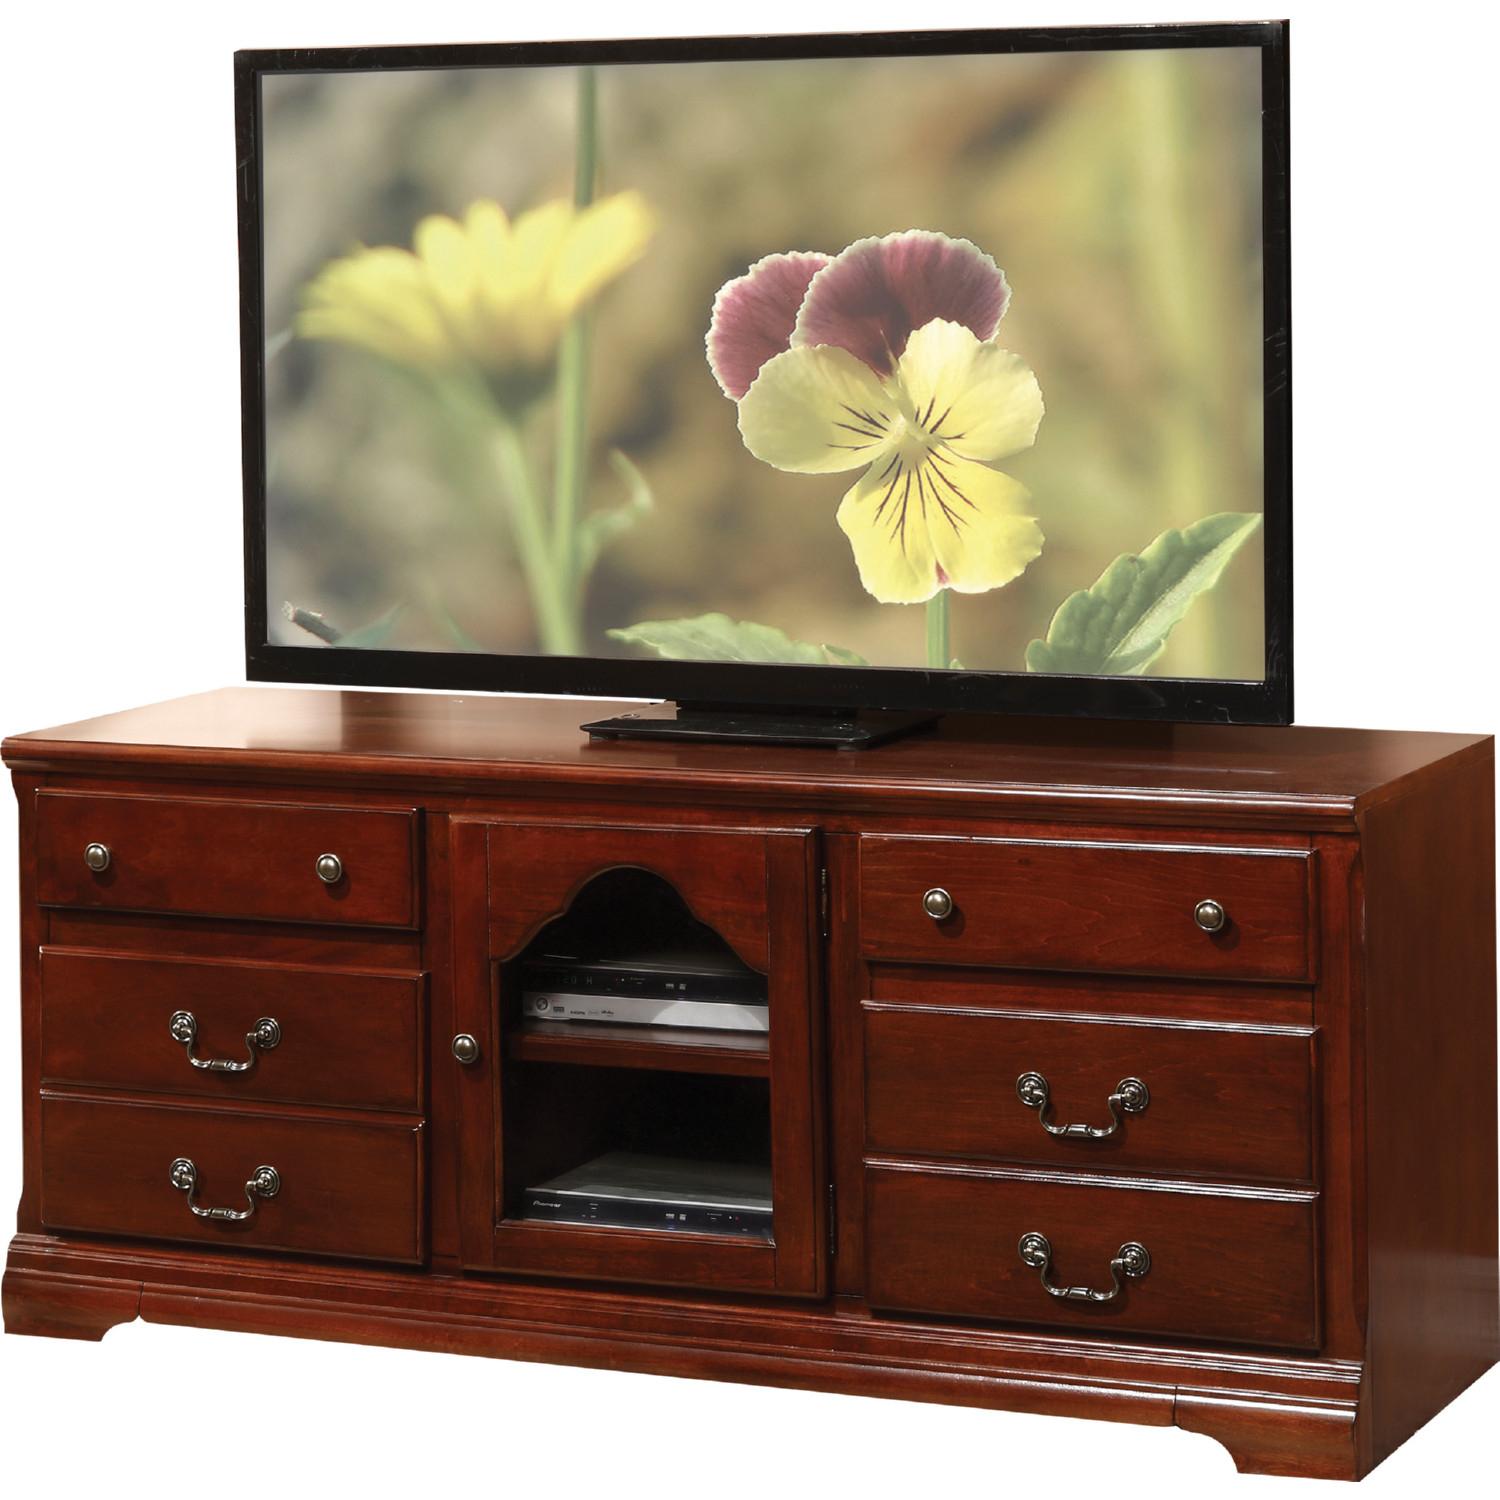 

    
Transitional Cherry TV Stand + Entertainment Center by Acme Hercules 91113-2pcs
